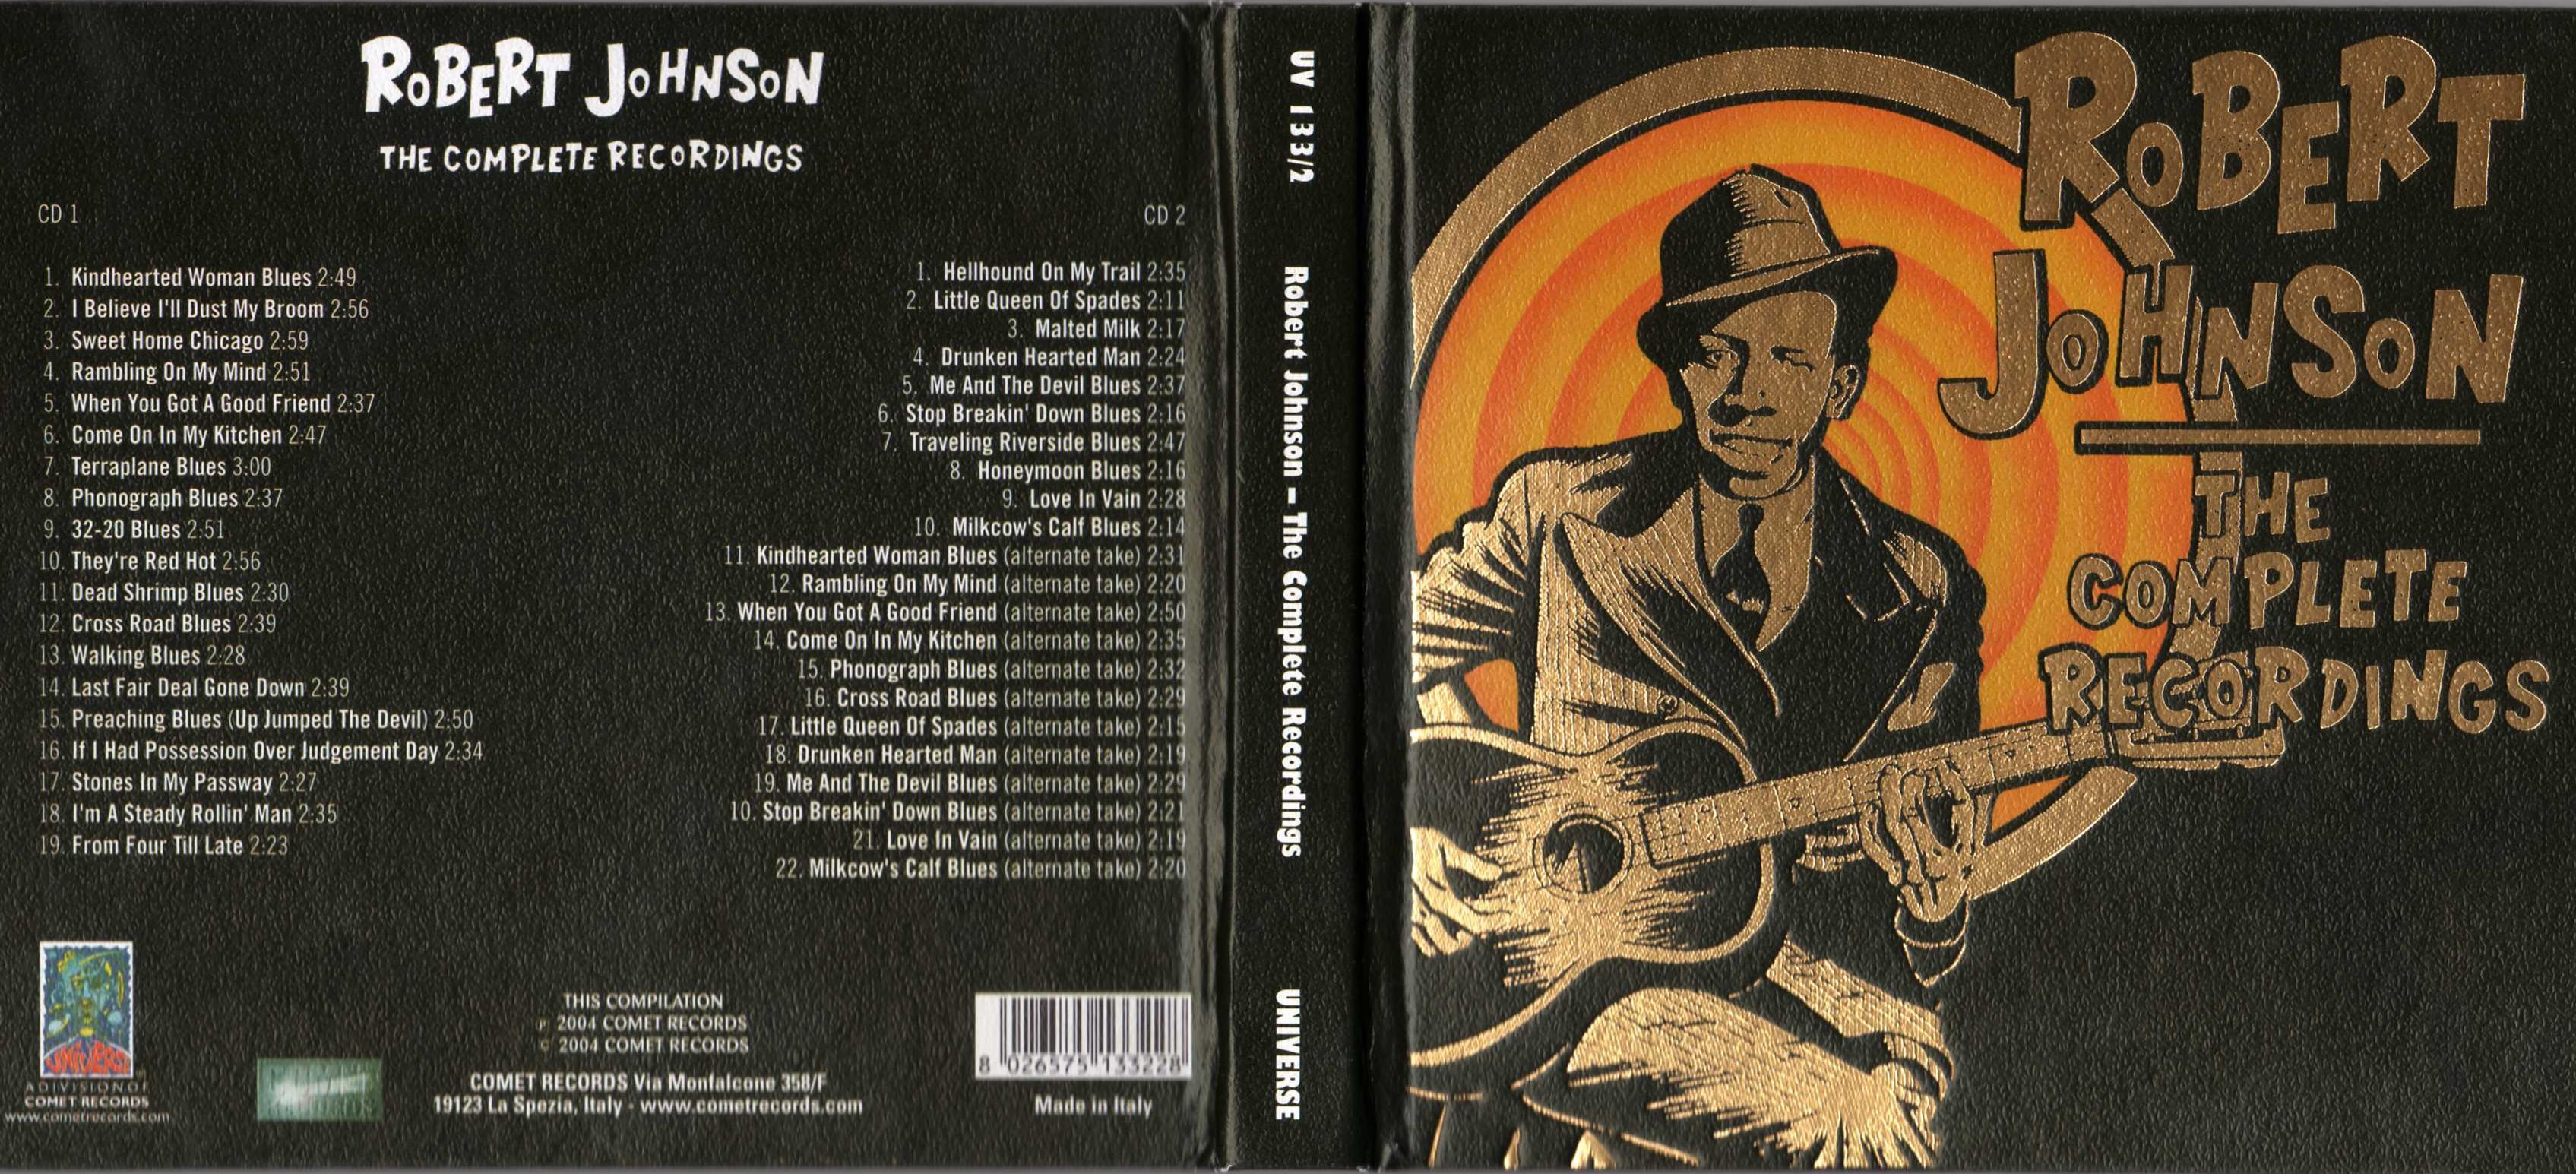 Release “The Complete Recordings” by Robert Johnson - Cover art